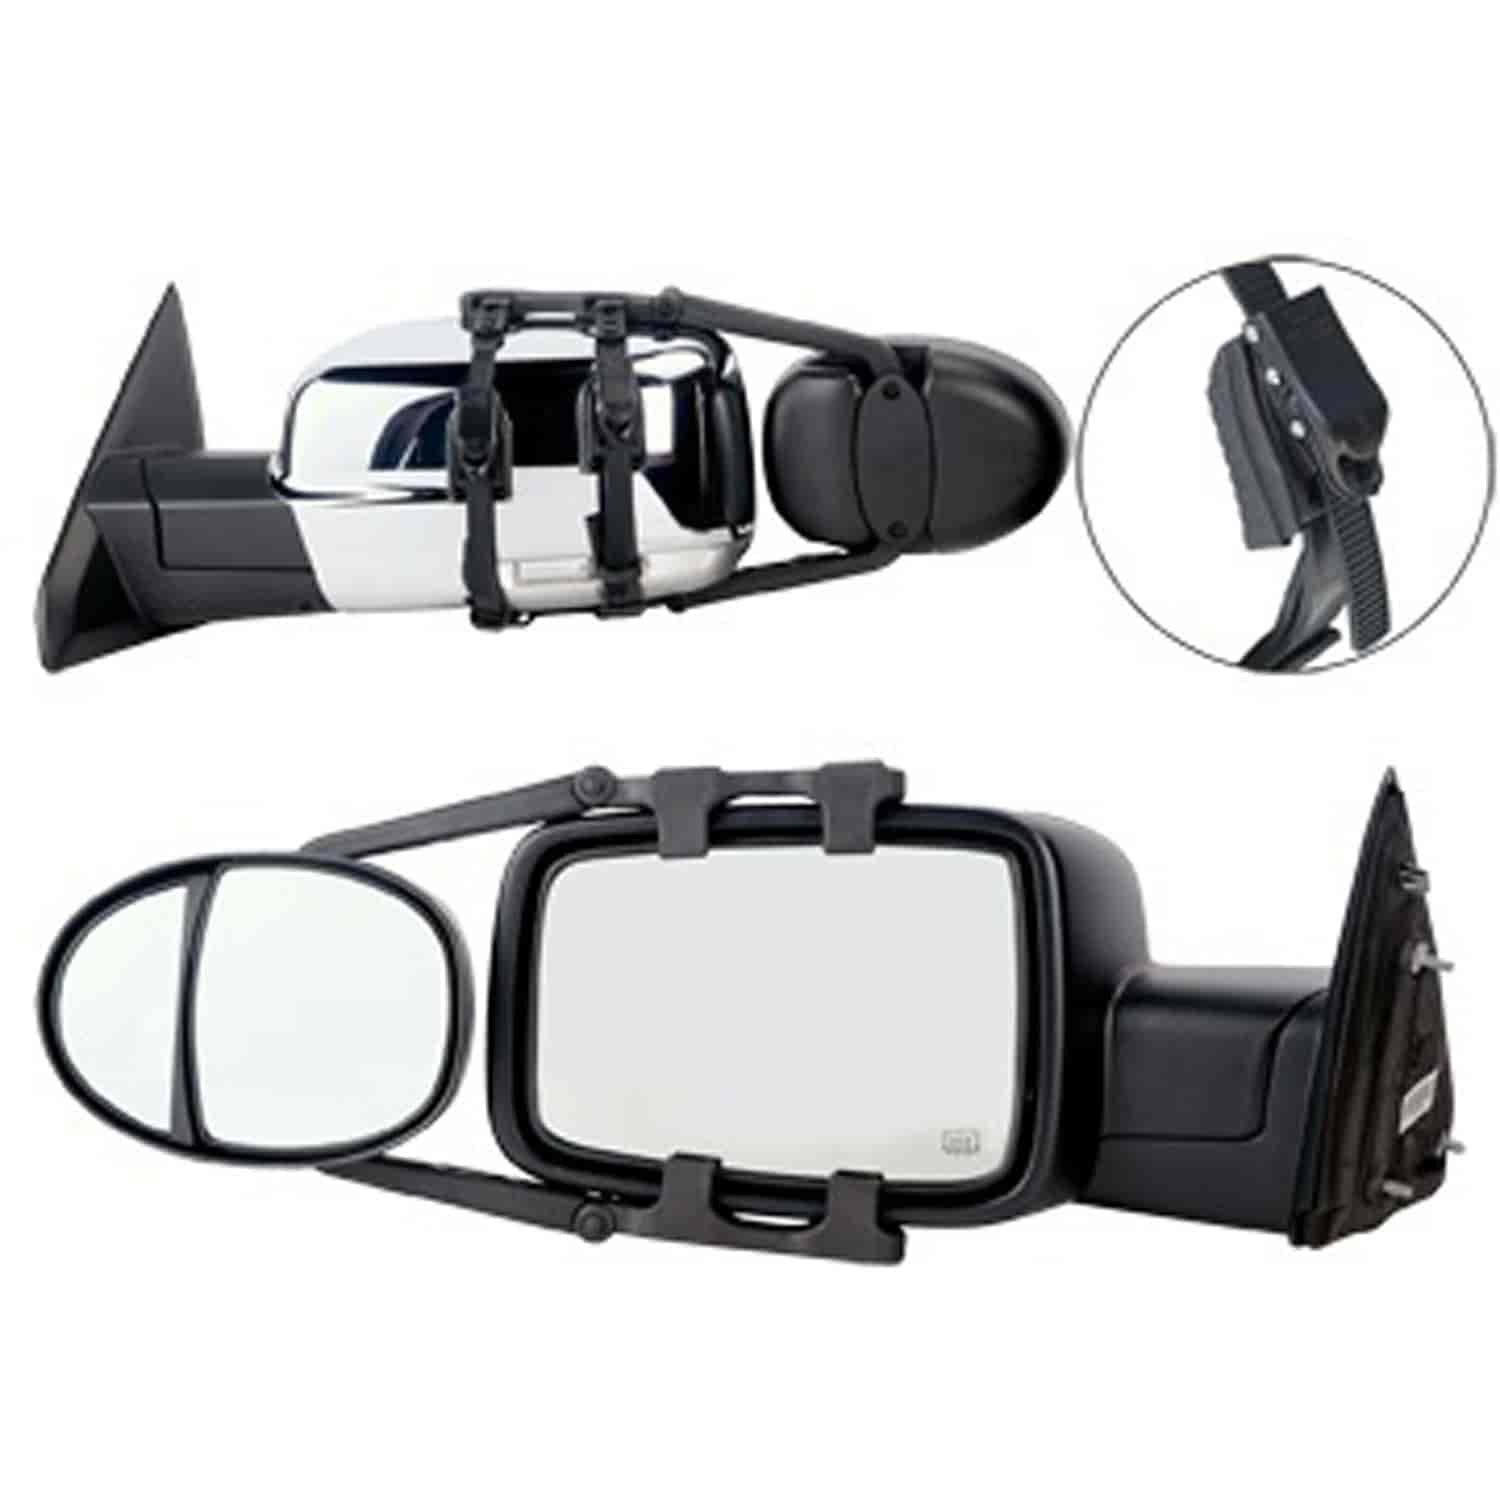 Universal Towing Mirror This is 5 inches by 7 inches with two mirror lenses.